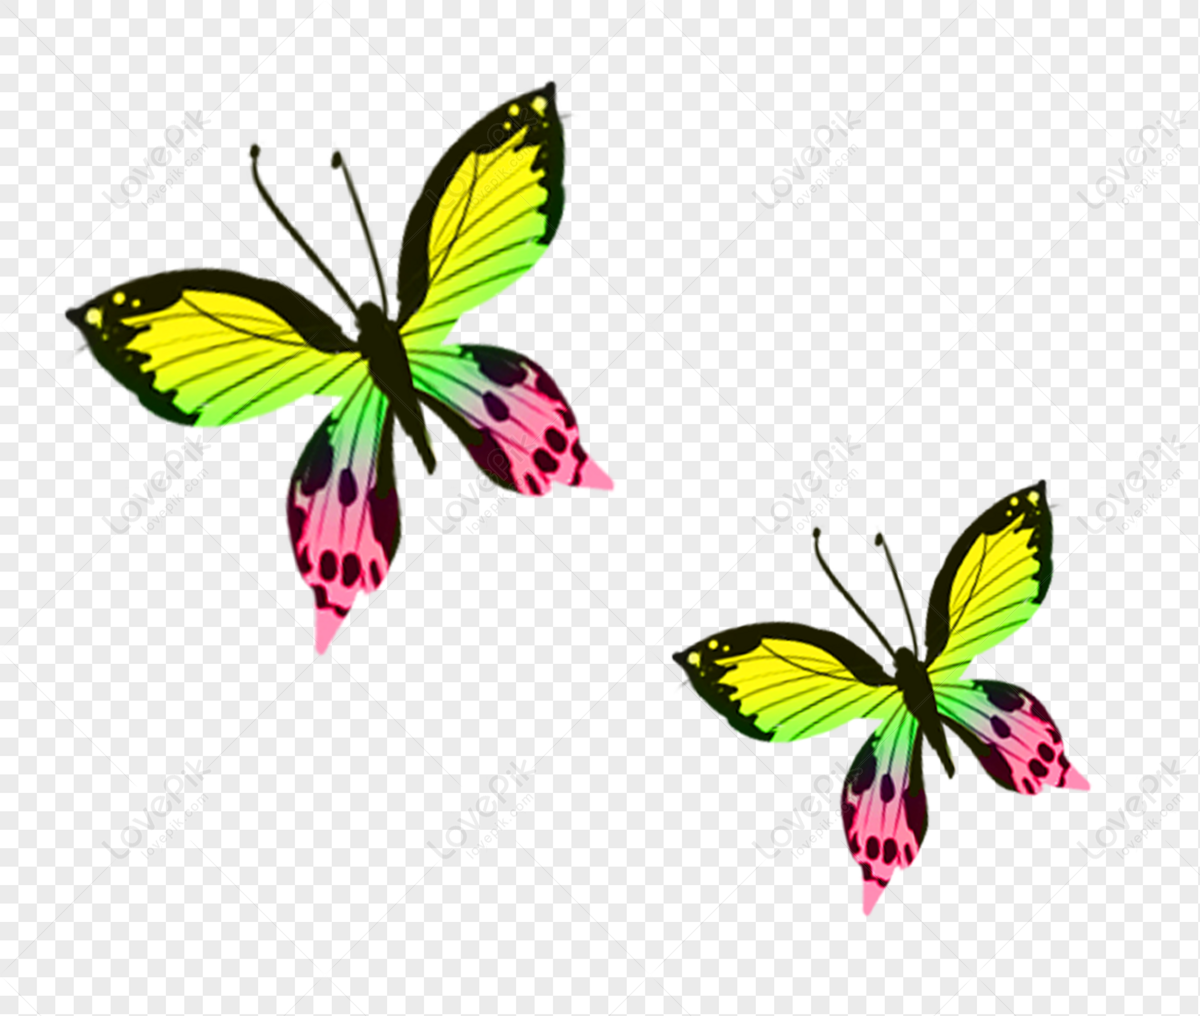 Butterfly PNG Transparent Background And Clipart Image For Free Download -  Lovepik | 400214320